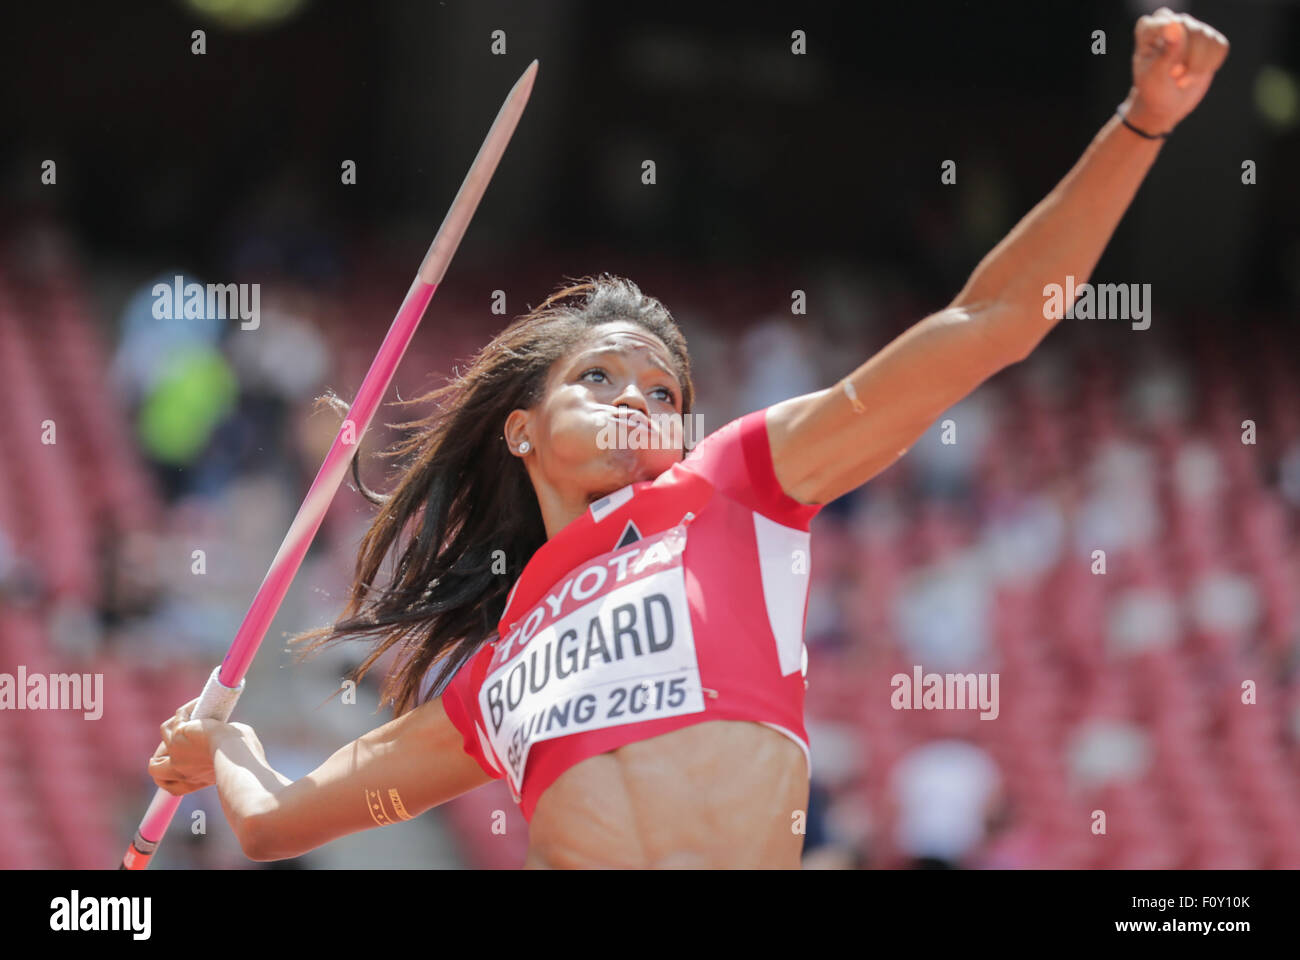 Beijing, China. 23rd Aug, 2015. Erica Bougard of the US competes in the Javelin Throw section of the Women's Heptathlon on the 15th International Association of Athletics Federations (IAAF) Athletics World Championships in Beijing, China, 23 August 2015. Photo: Michael Kappeler/dpa/Alamy Live News Stock Photo